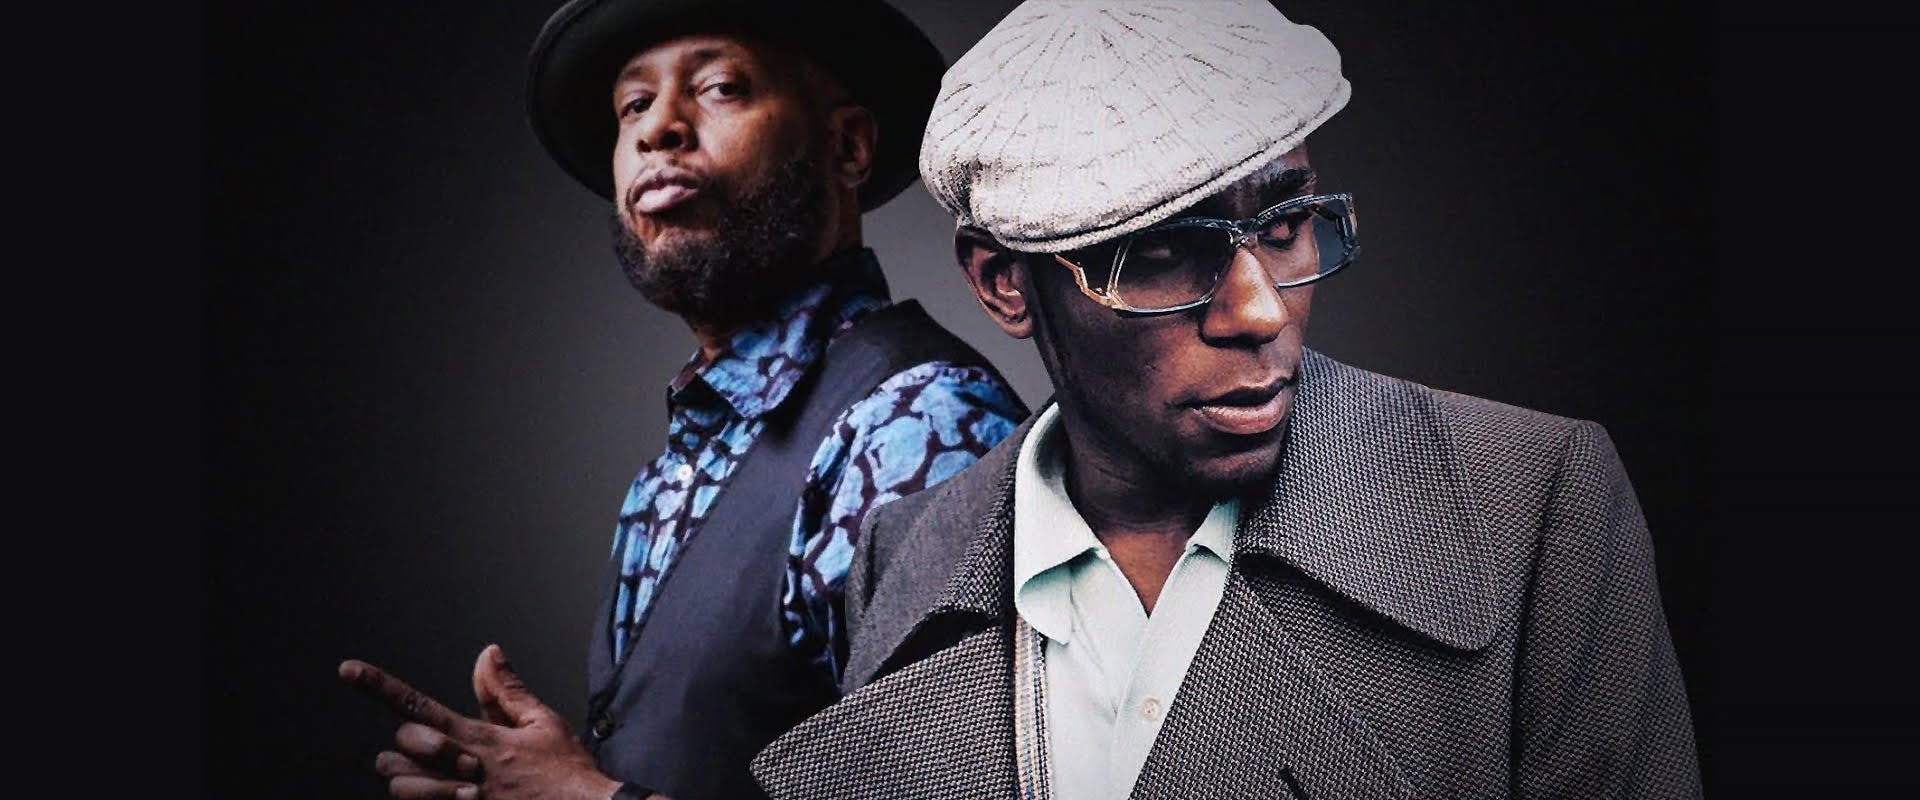 Black Star new album No Fear of Time: Mos Def and Talib Kweli are